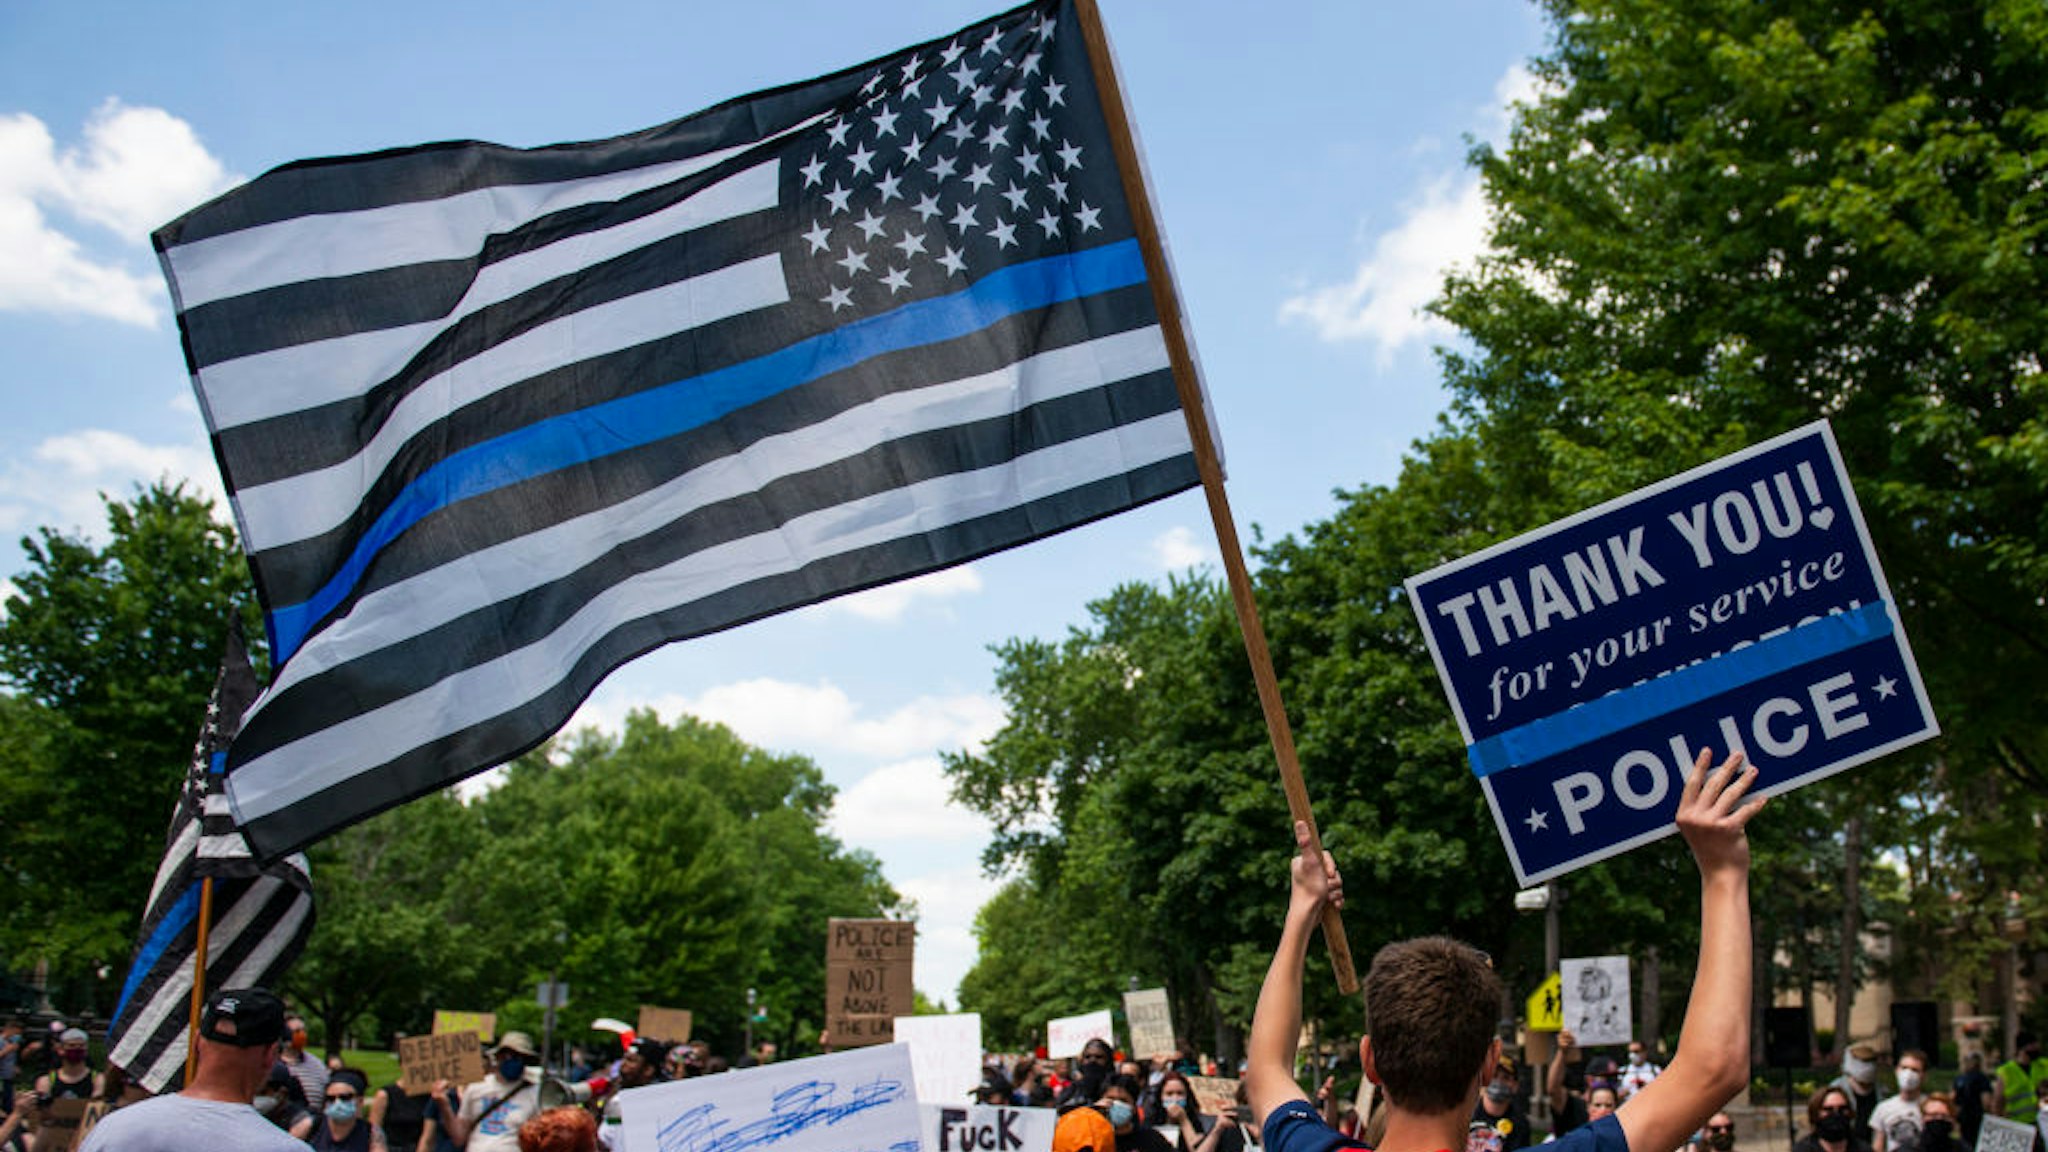 ST PAUL, MN - JUNE 27: A demonstrator holds a "Thin Blue Line" flag and a sign in support of police during a protest outside the Governors Mansion on June 27, 2020 in St Paul, Minnesota. A group called "Bikers for 45" advocating a pro-police stance arranged the protest and were met with counter-protesters calling for measures to defund police.